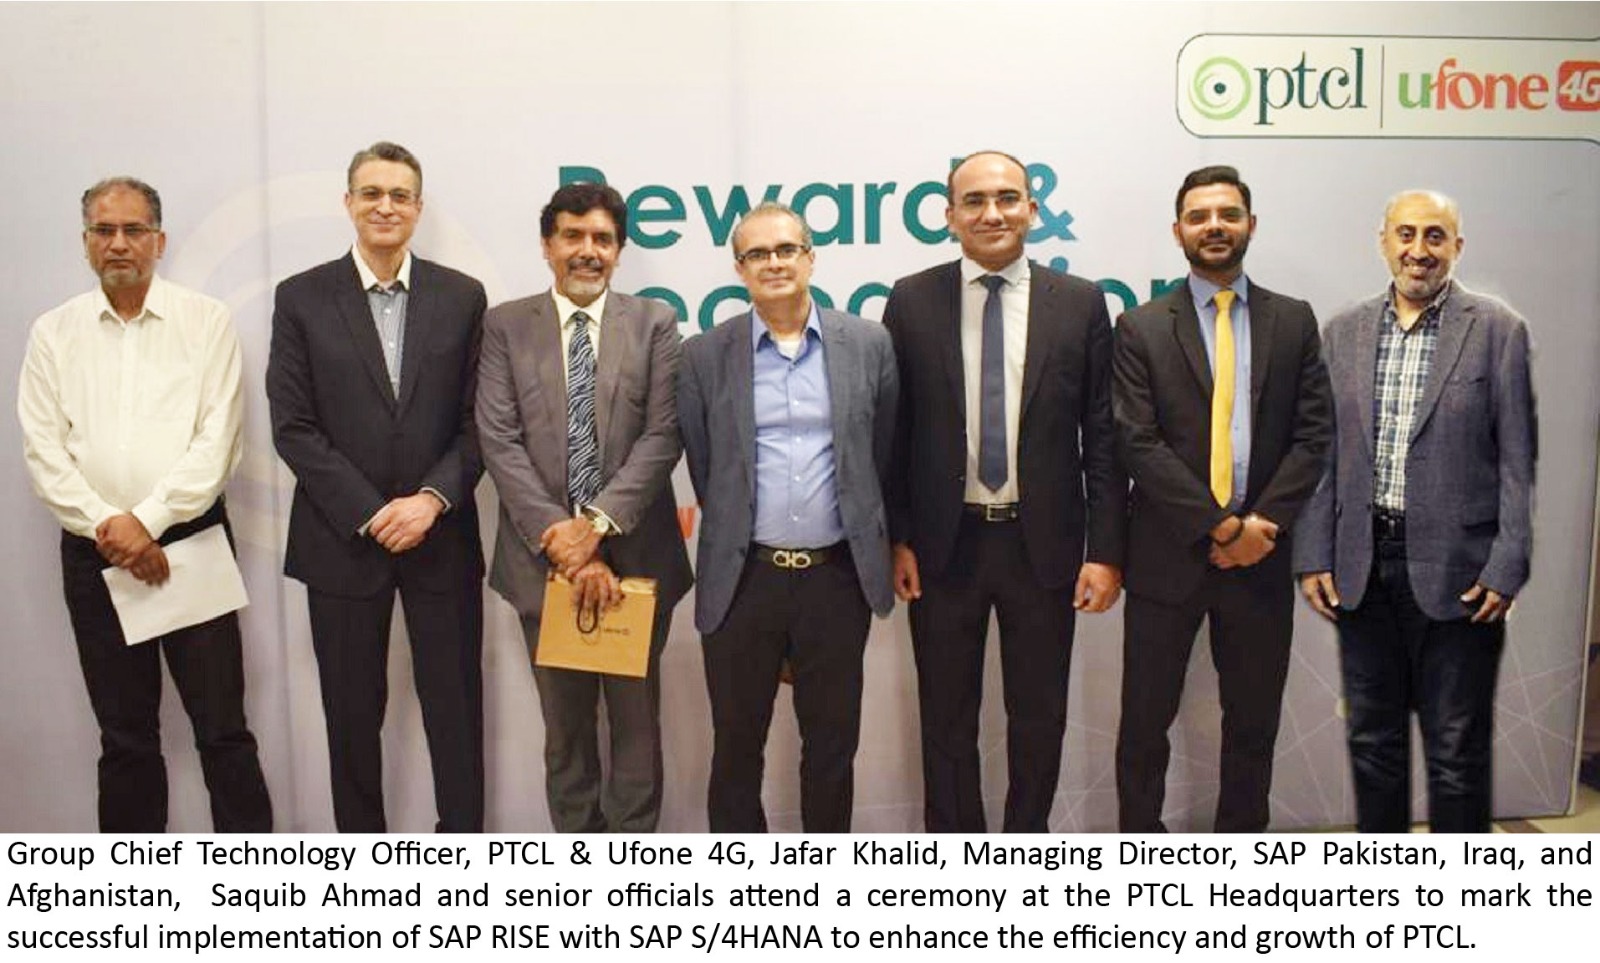 PTCL & Ufone 4G achieves seamless go-live of SAP S/4HANA for enhanced efficiency and growth